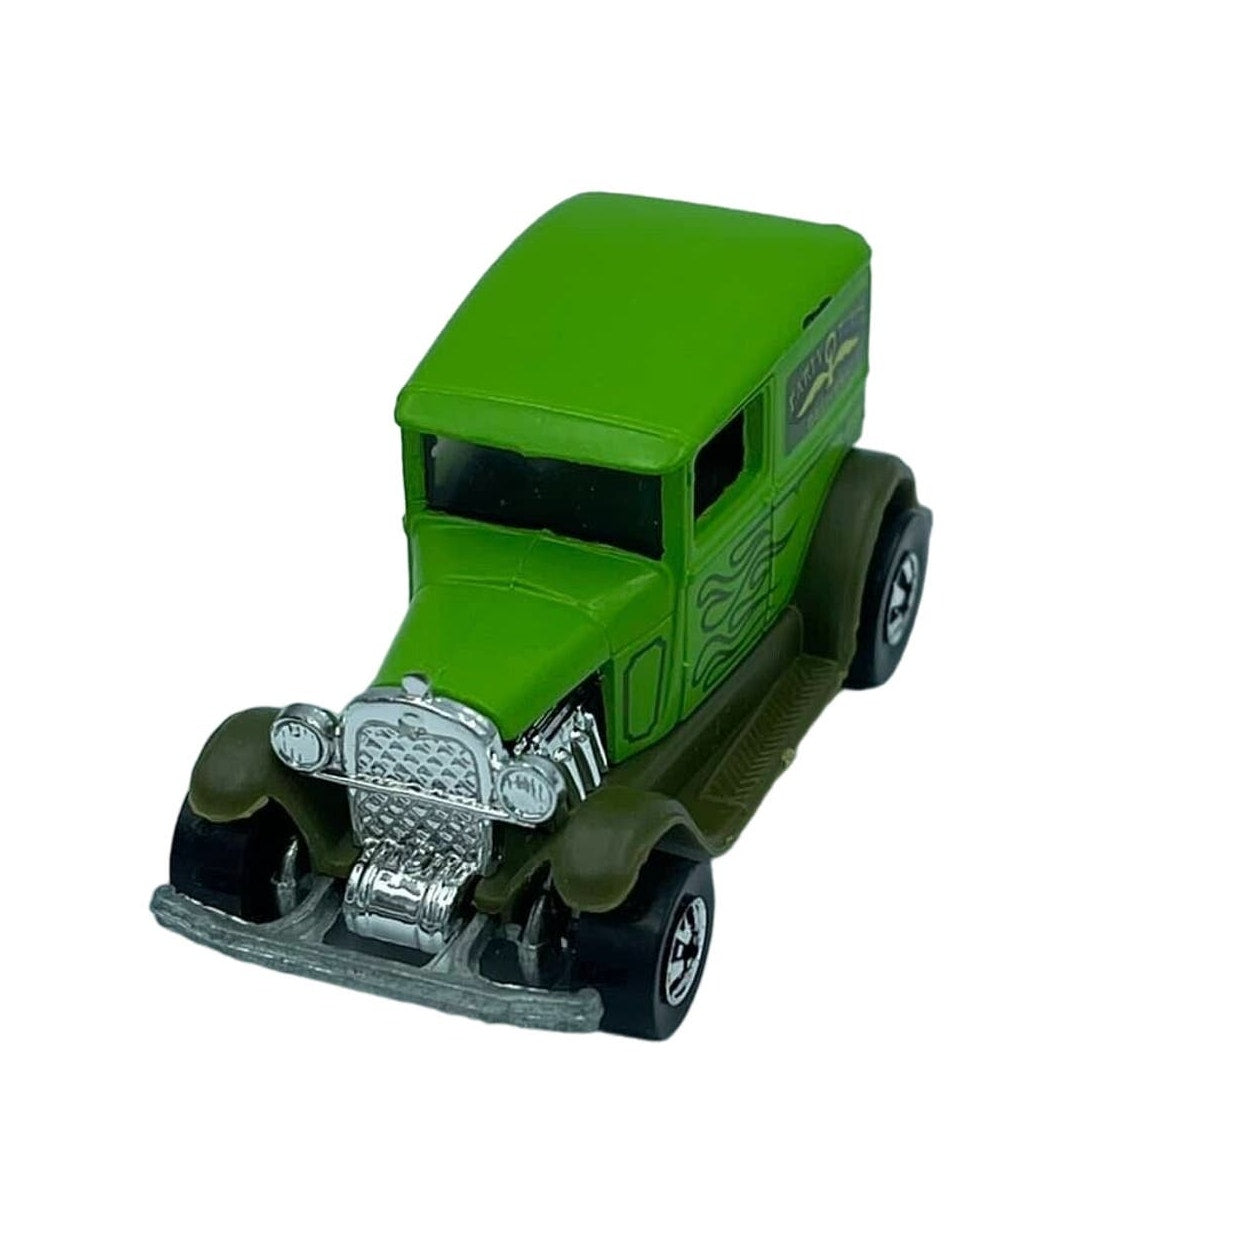 1977 Hot Wheels Green Early Times Delivery Truck Mattel Hong Kong